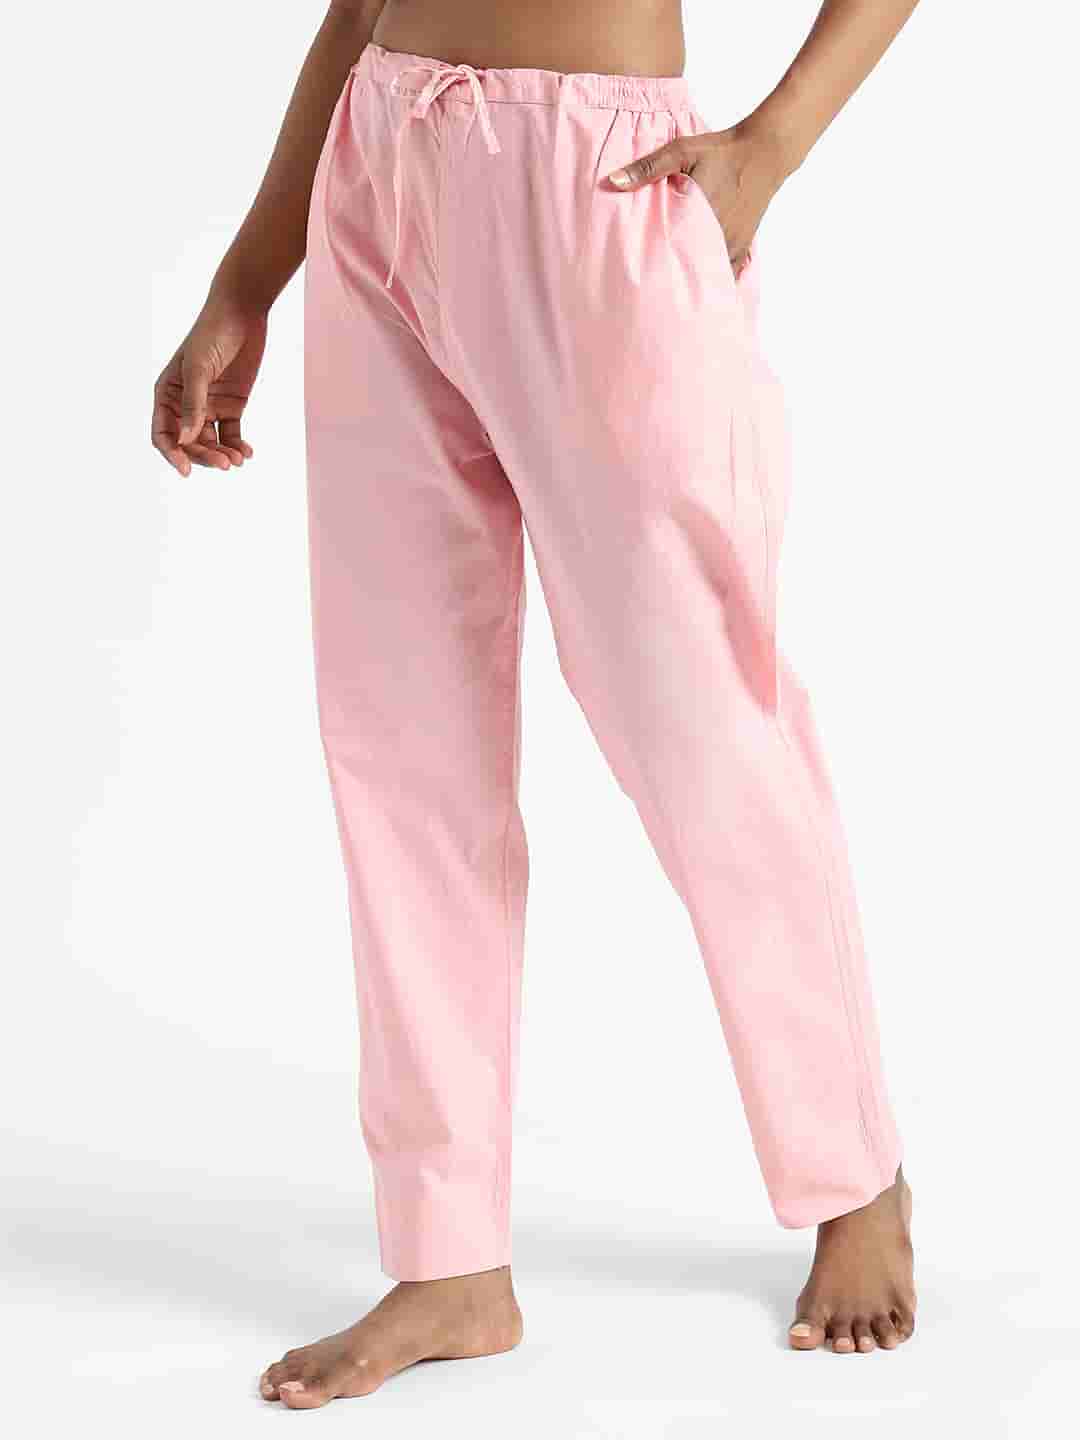 Organic Cotton & Natural Dyed Women’s Rose Pink Color Slim Fit Pants by Livbio